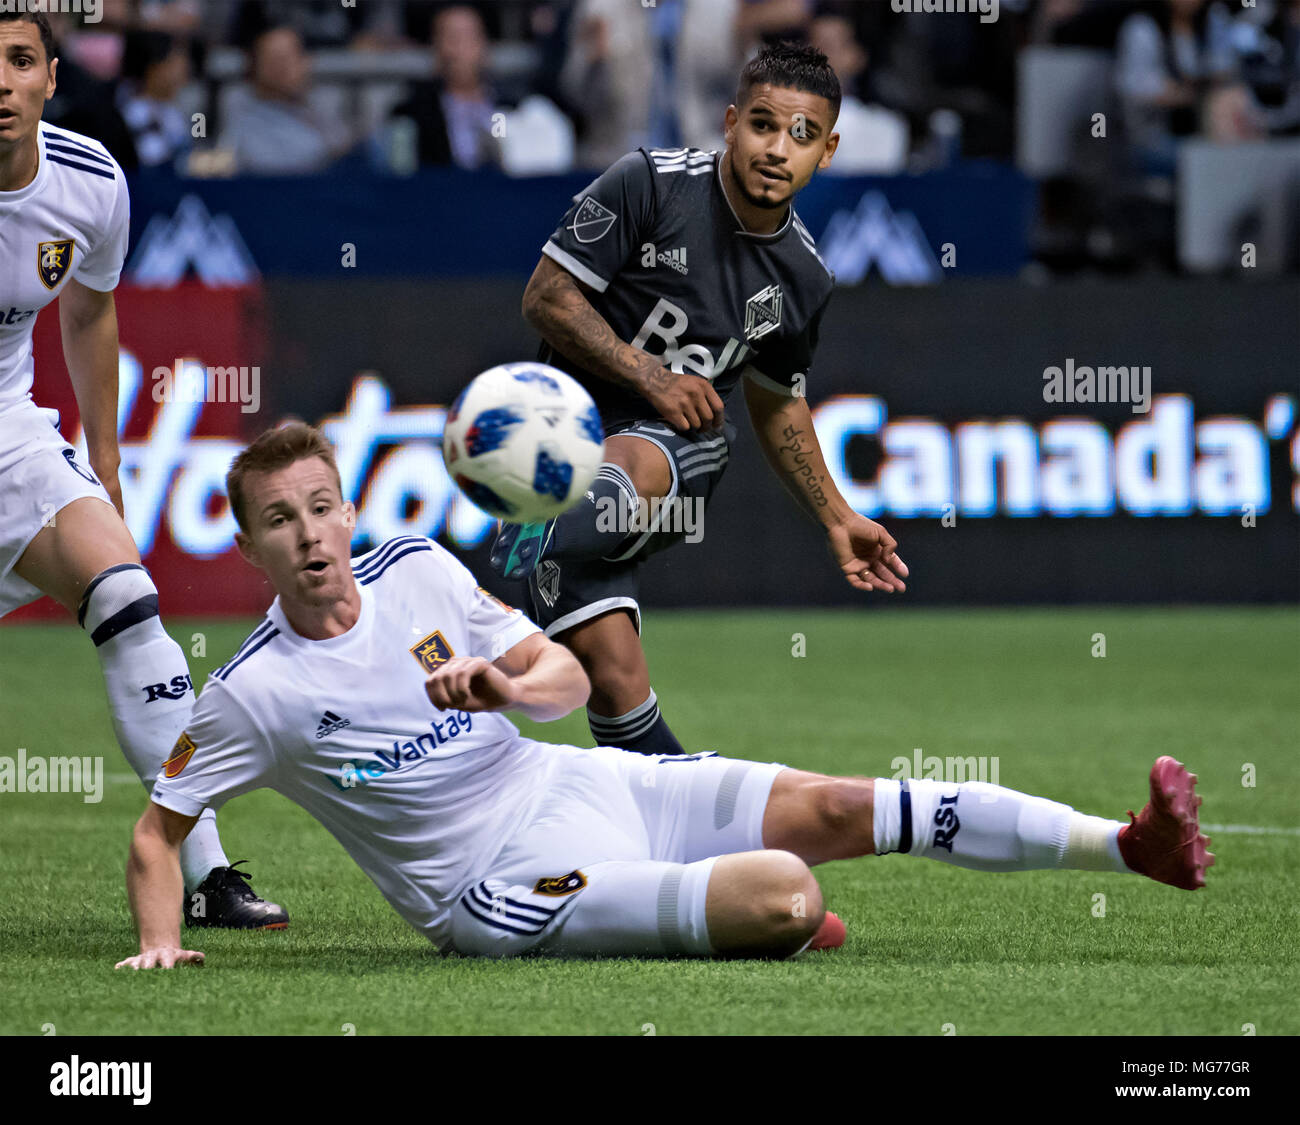 Vancouver, Canada. 27th Apr, 2018. Vancouver Whitecaps' Cristian Techera (top) vies with Real Salt Lake's Nick Besler during the Major League Soccer (MLS) regular season soccer match between Vancouver Whitecaps and Real Salt Lake in Vancouver, Canada, on April 27, 2018. Credit: Andrew Soong/Xinhua/Alamy Live News Stock Photo